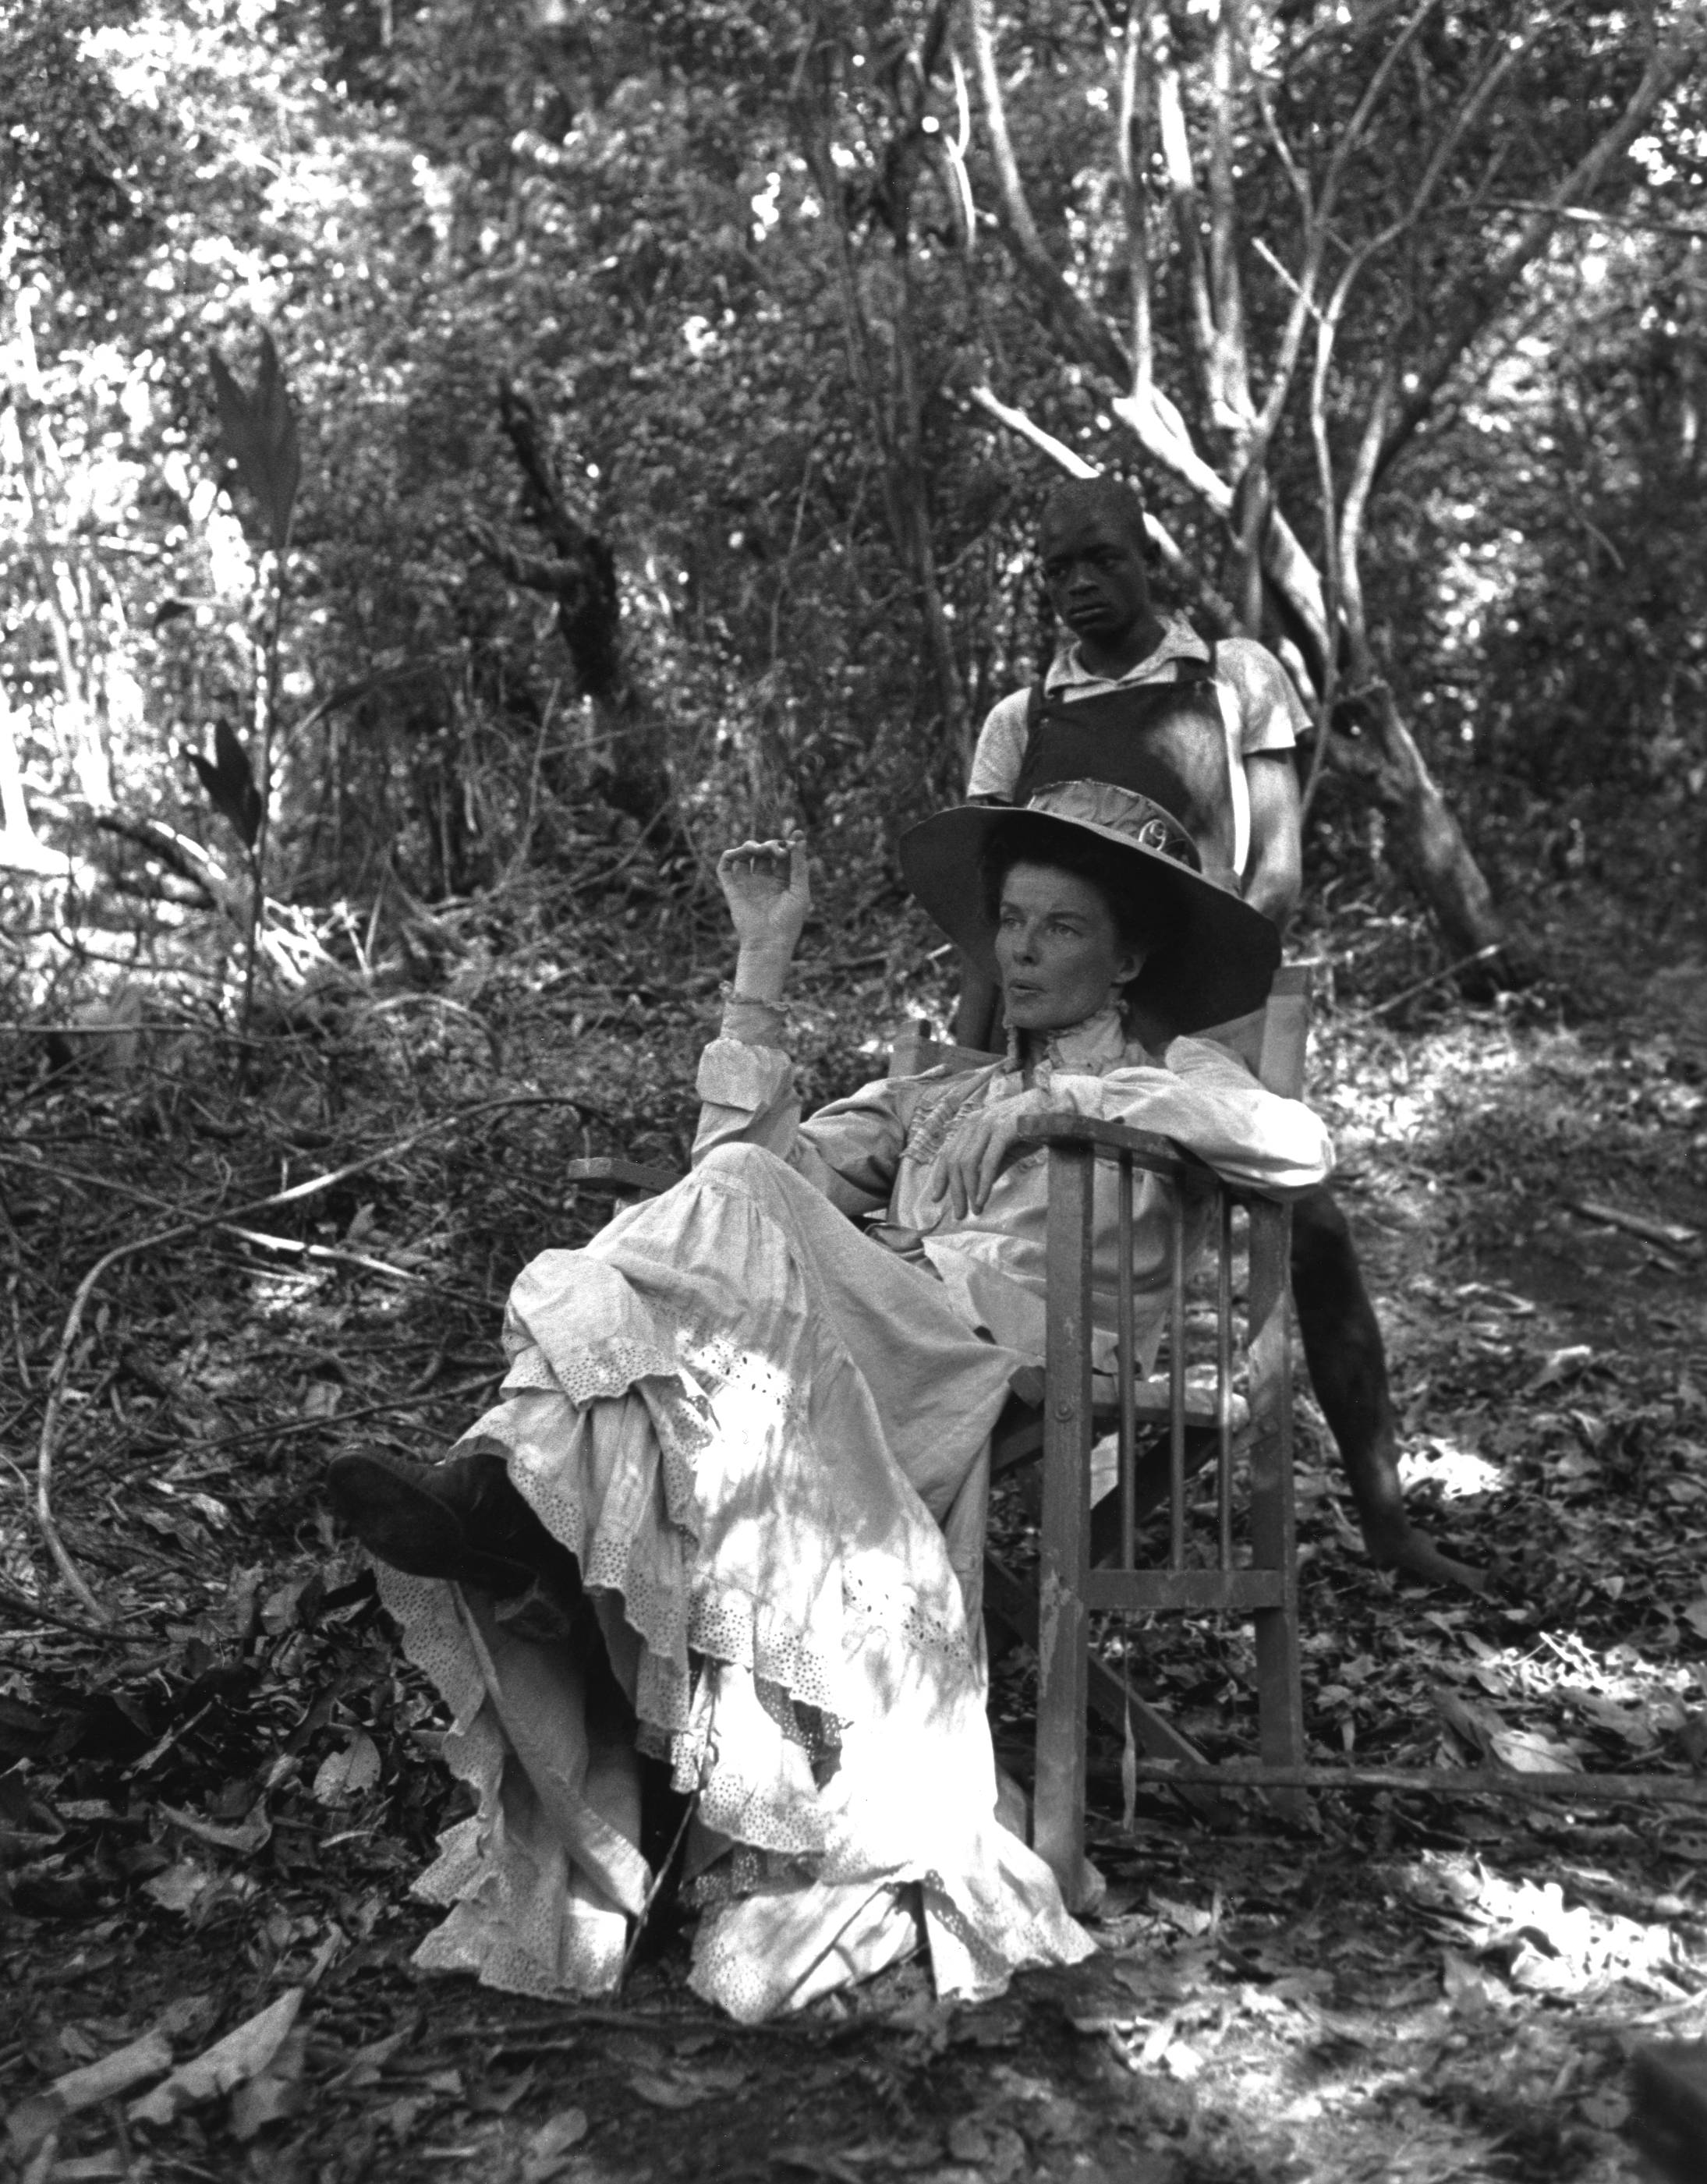 Katharine Hepburn enjoys a moment away from the filming of The African Queen.